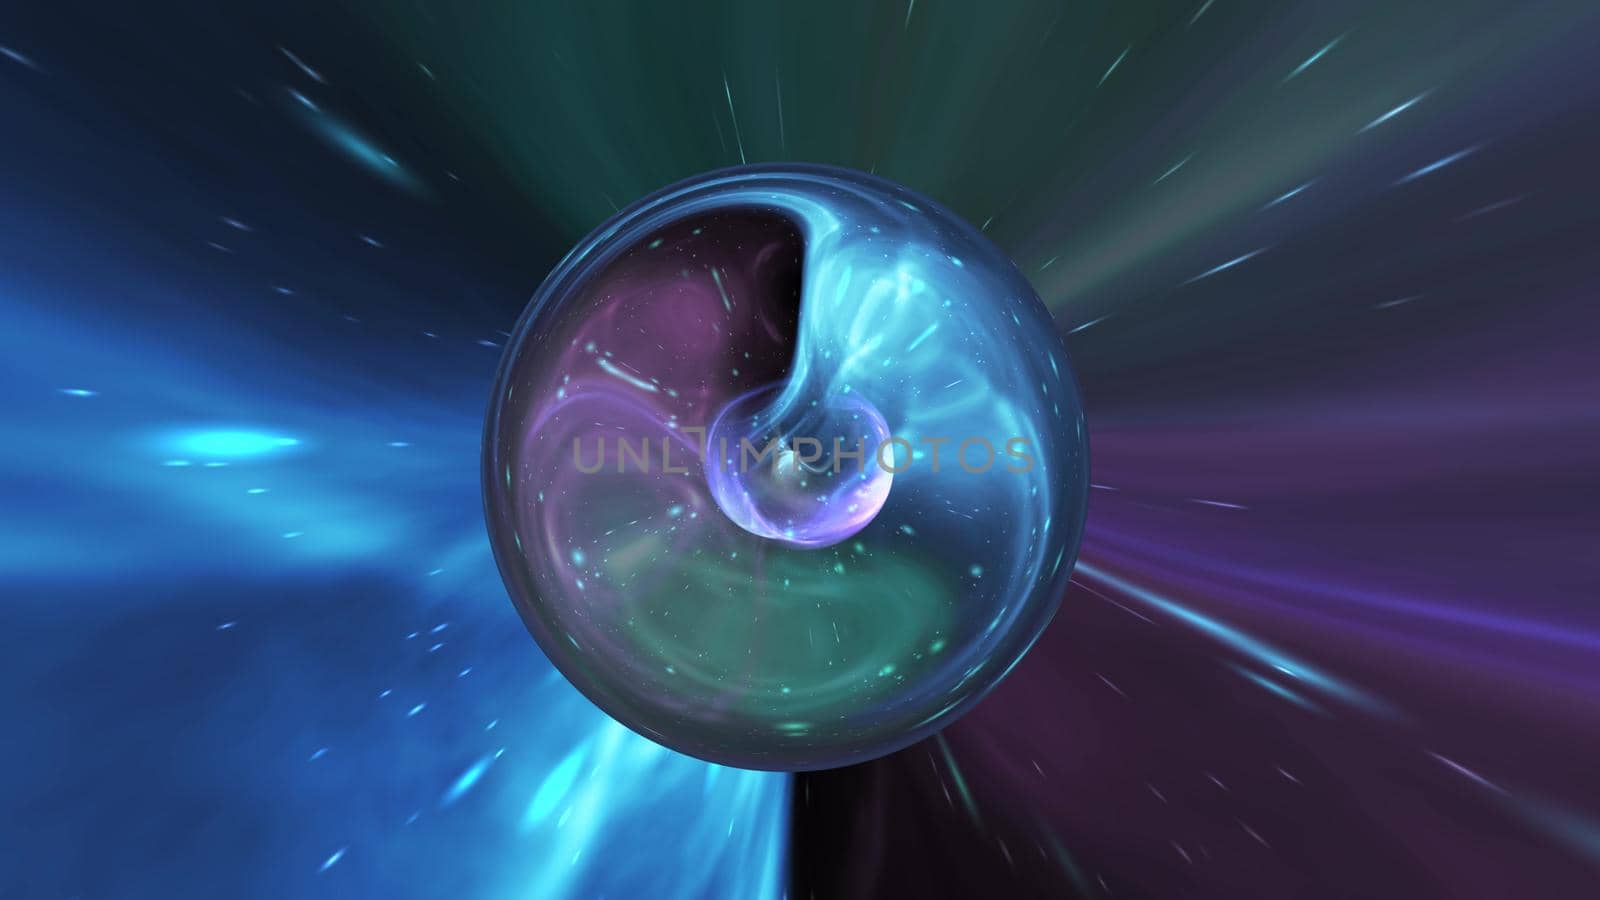 Illustration of the galaxy ball abstract background by Chudakov